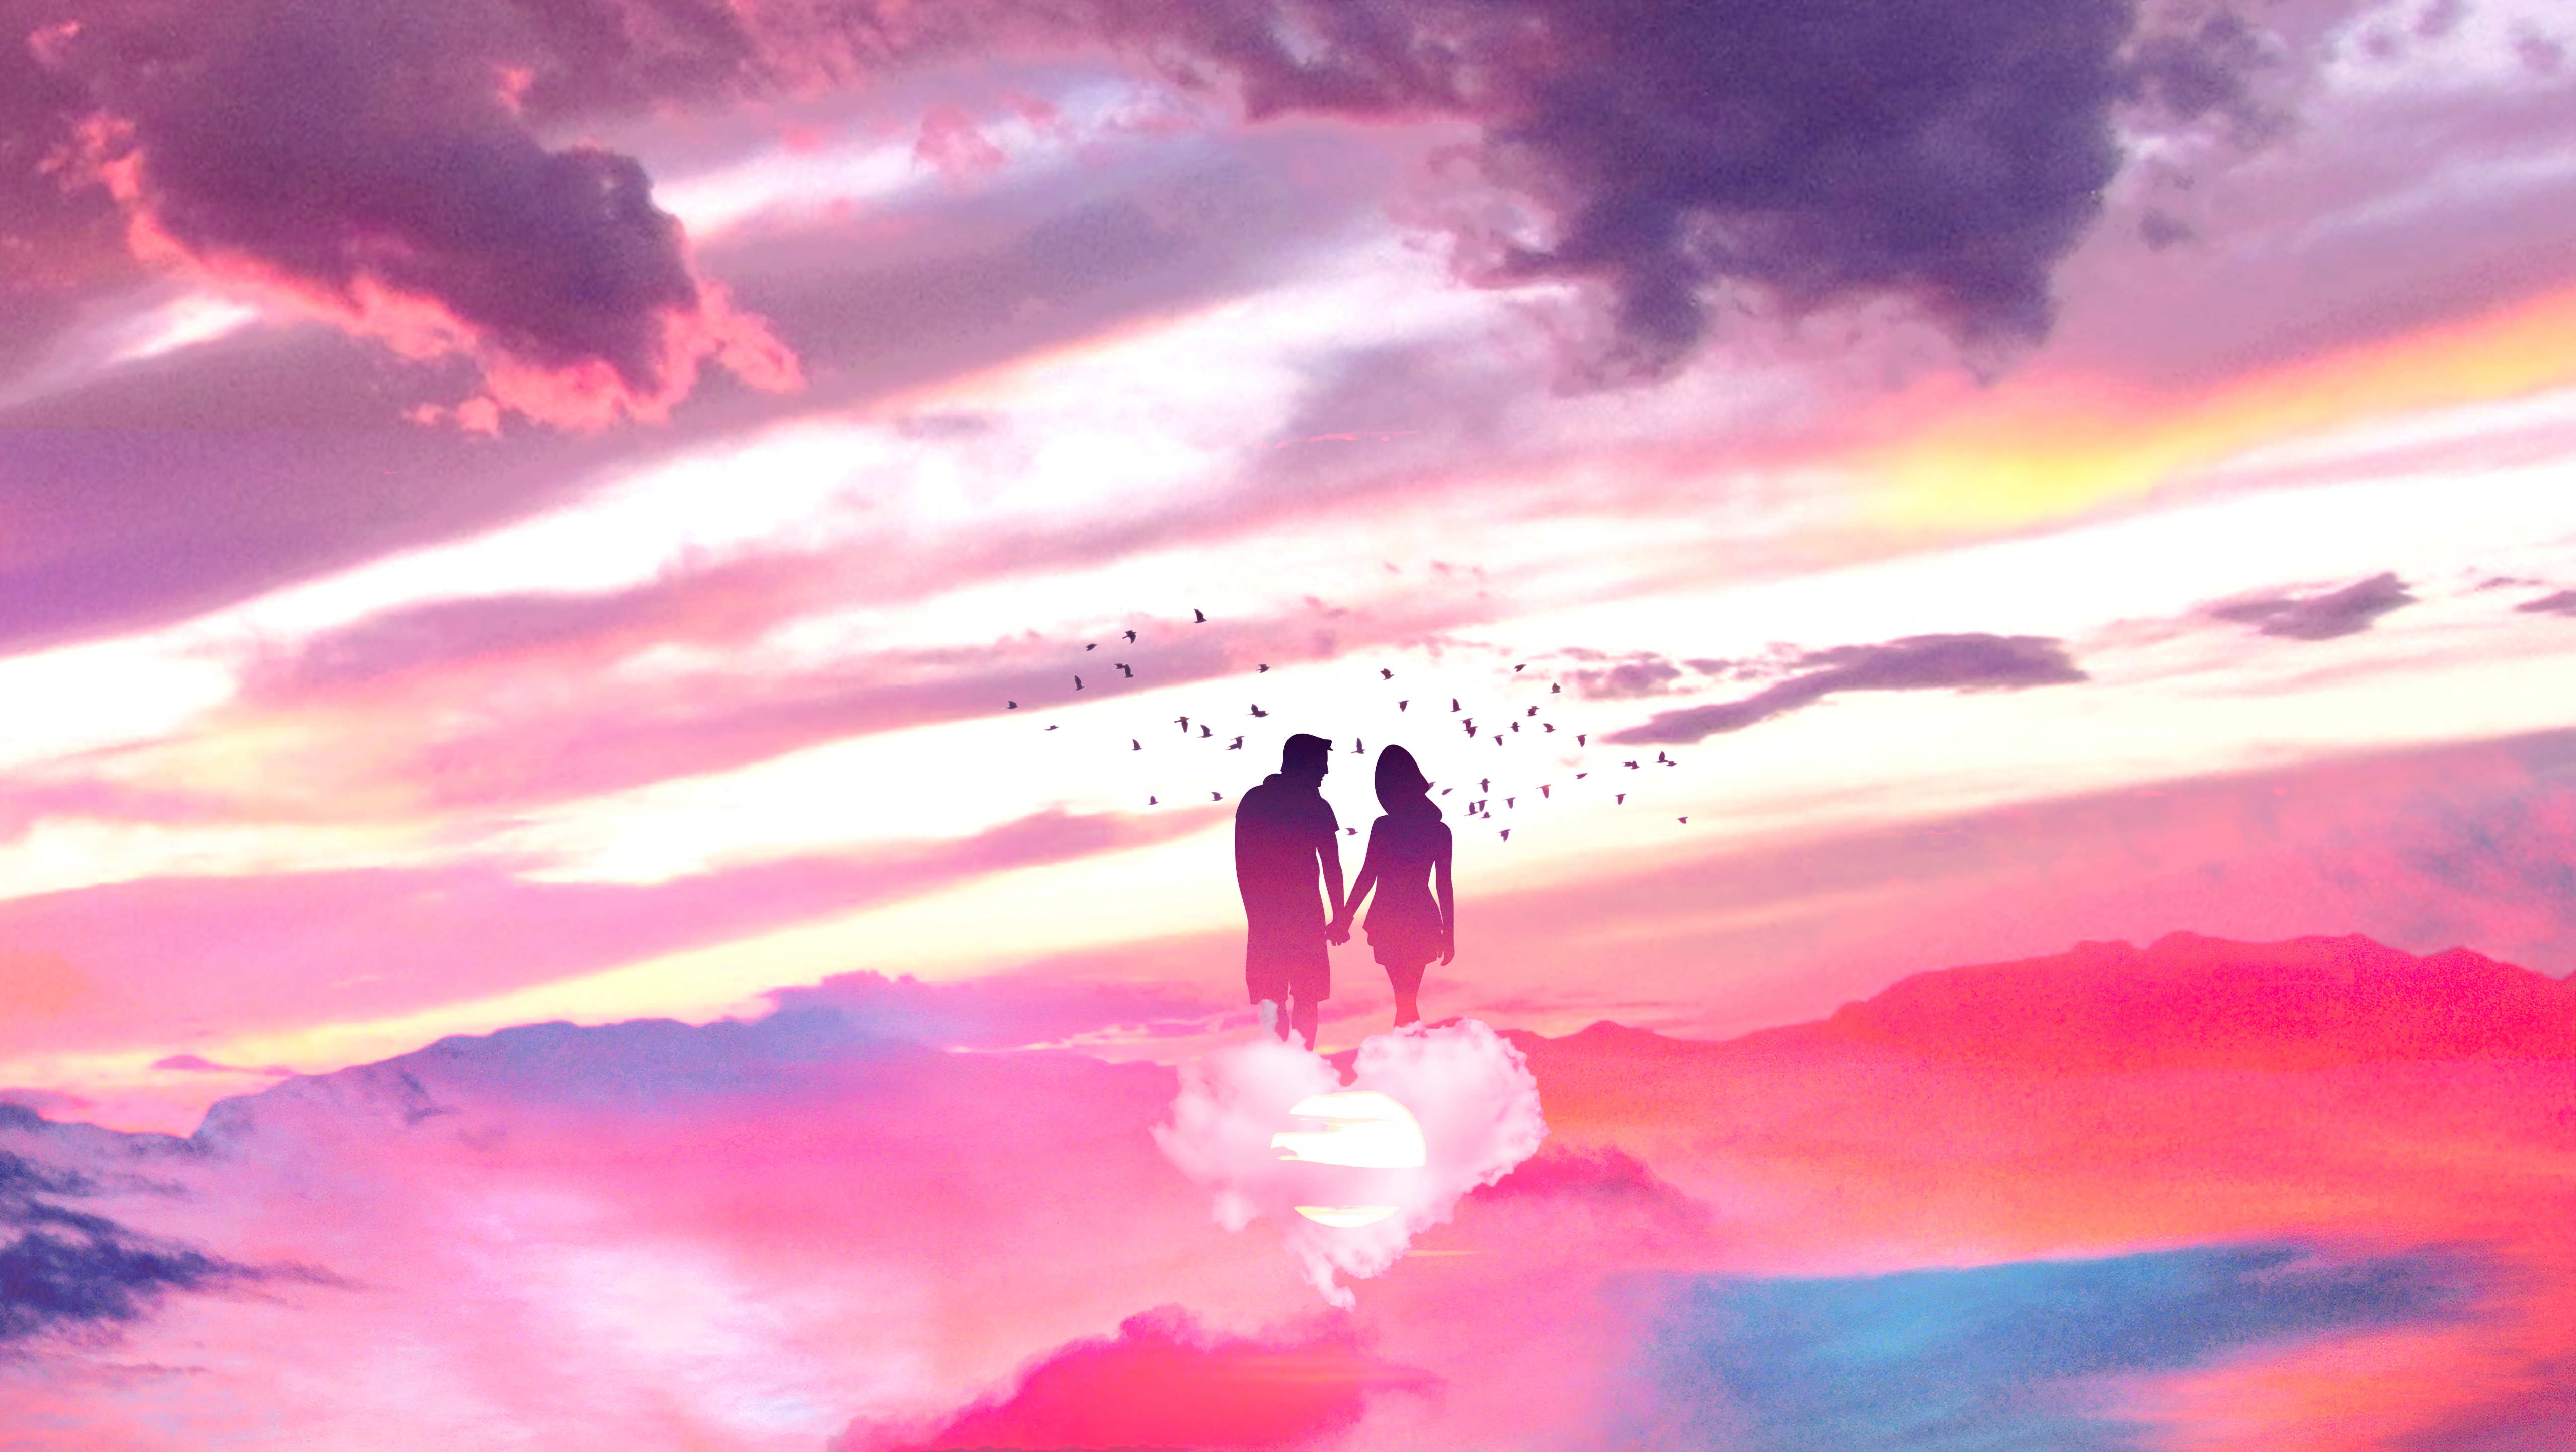 HD wallpaper, Above Clouds, Lovers, Romantic, 5K, Pink, Surreal, Together, Dream, Couple